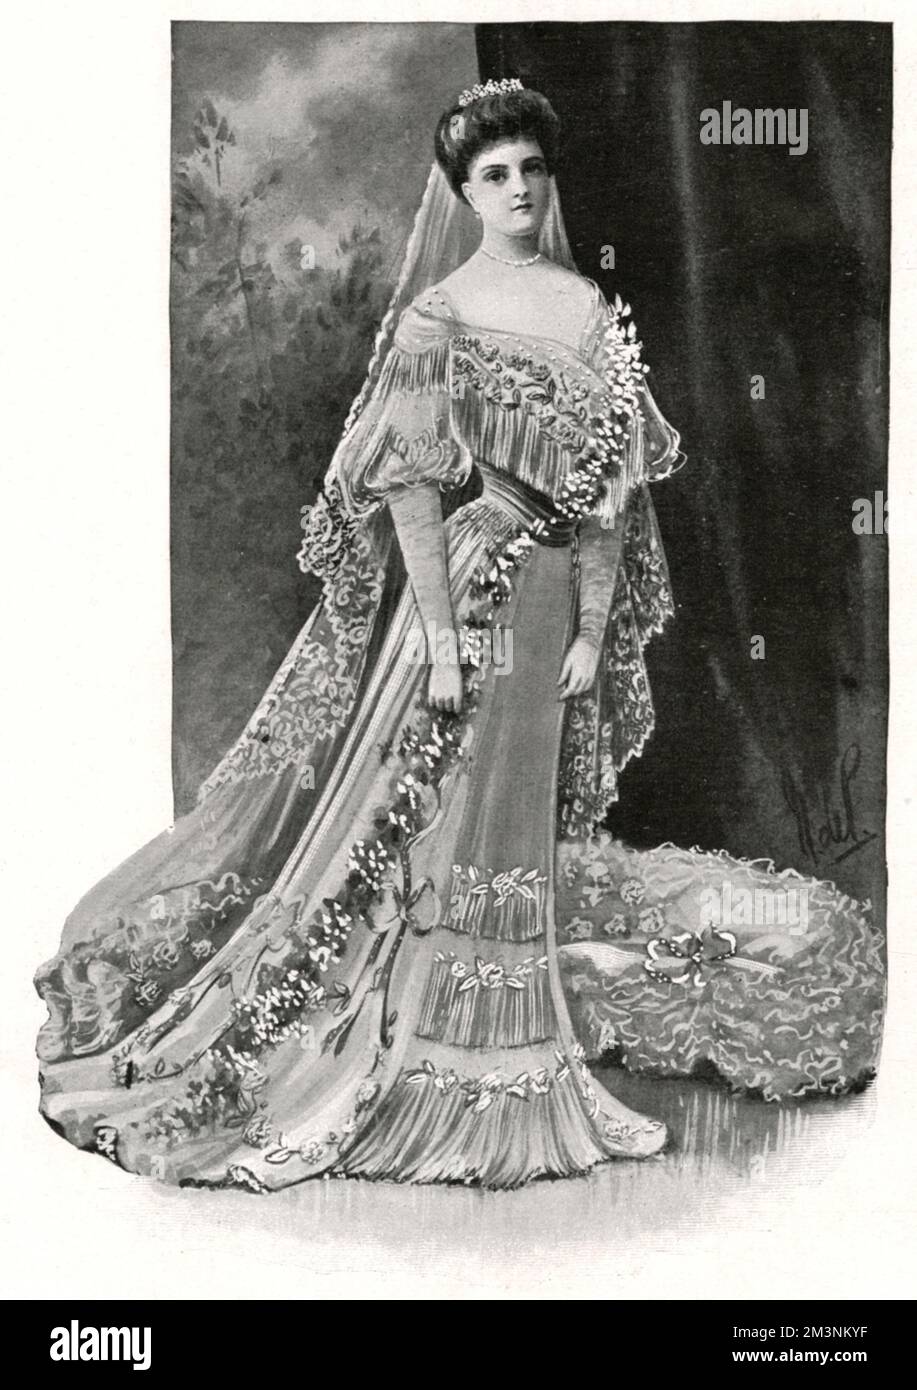 Princess Alice of Albany, later Countess of Athlone (1883-1981), seen here in her wedding dress.  She married Prince Alexander of Teck, later Alexander Cambridge, 1st Earl of Athlone (1874-1957), her second cousin once removed. The wedding took place on 10 February 1904 at St George's Chapel, Windsor. After their marriage she was known as Princess Alexander of Teck.      Date: February 1904 Stock Photo